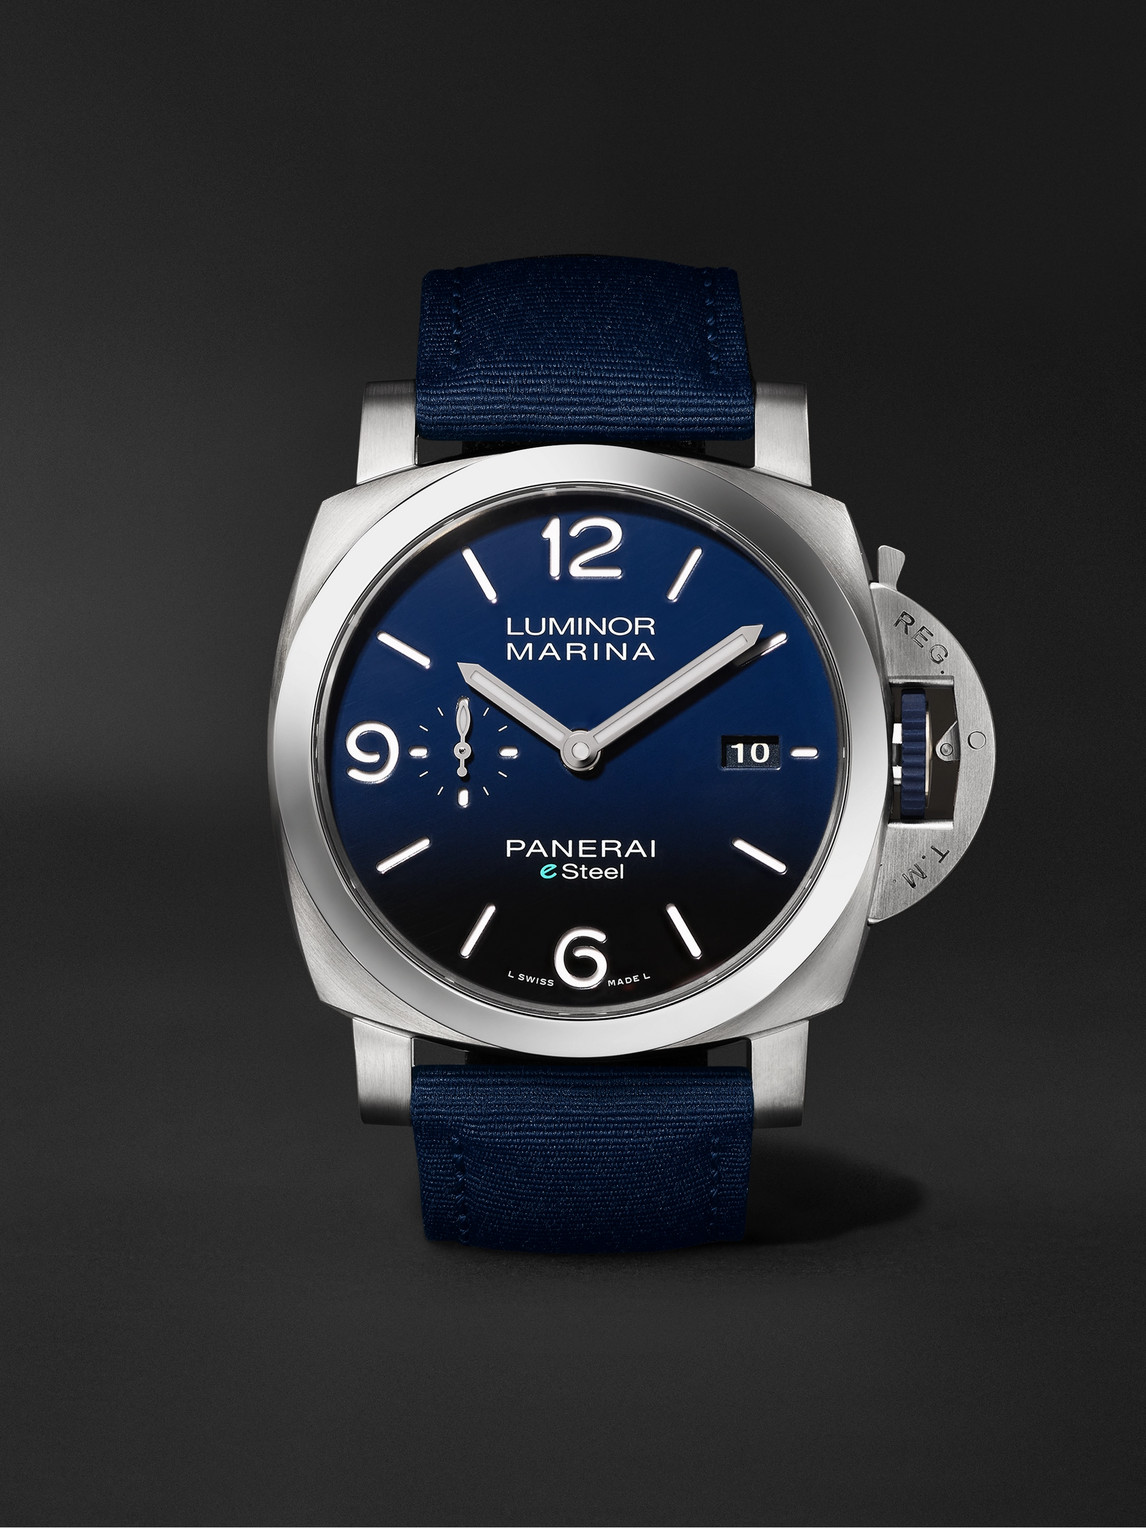 Panerai Luminor Marina Automatic 44mm Esteel And Recycled Pet Watch, Ref. No. Pam01157 In Blue